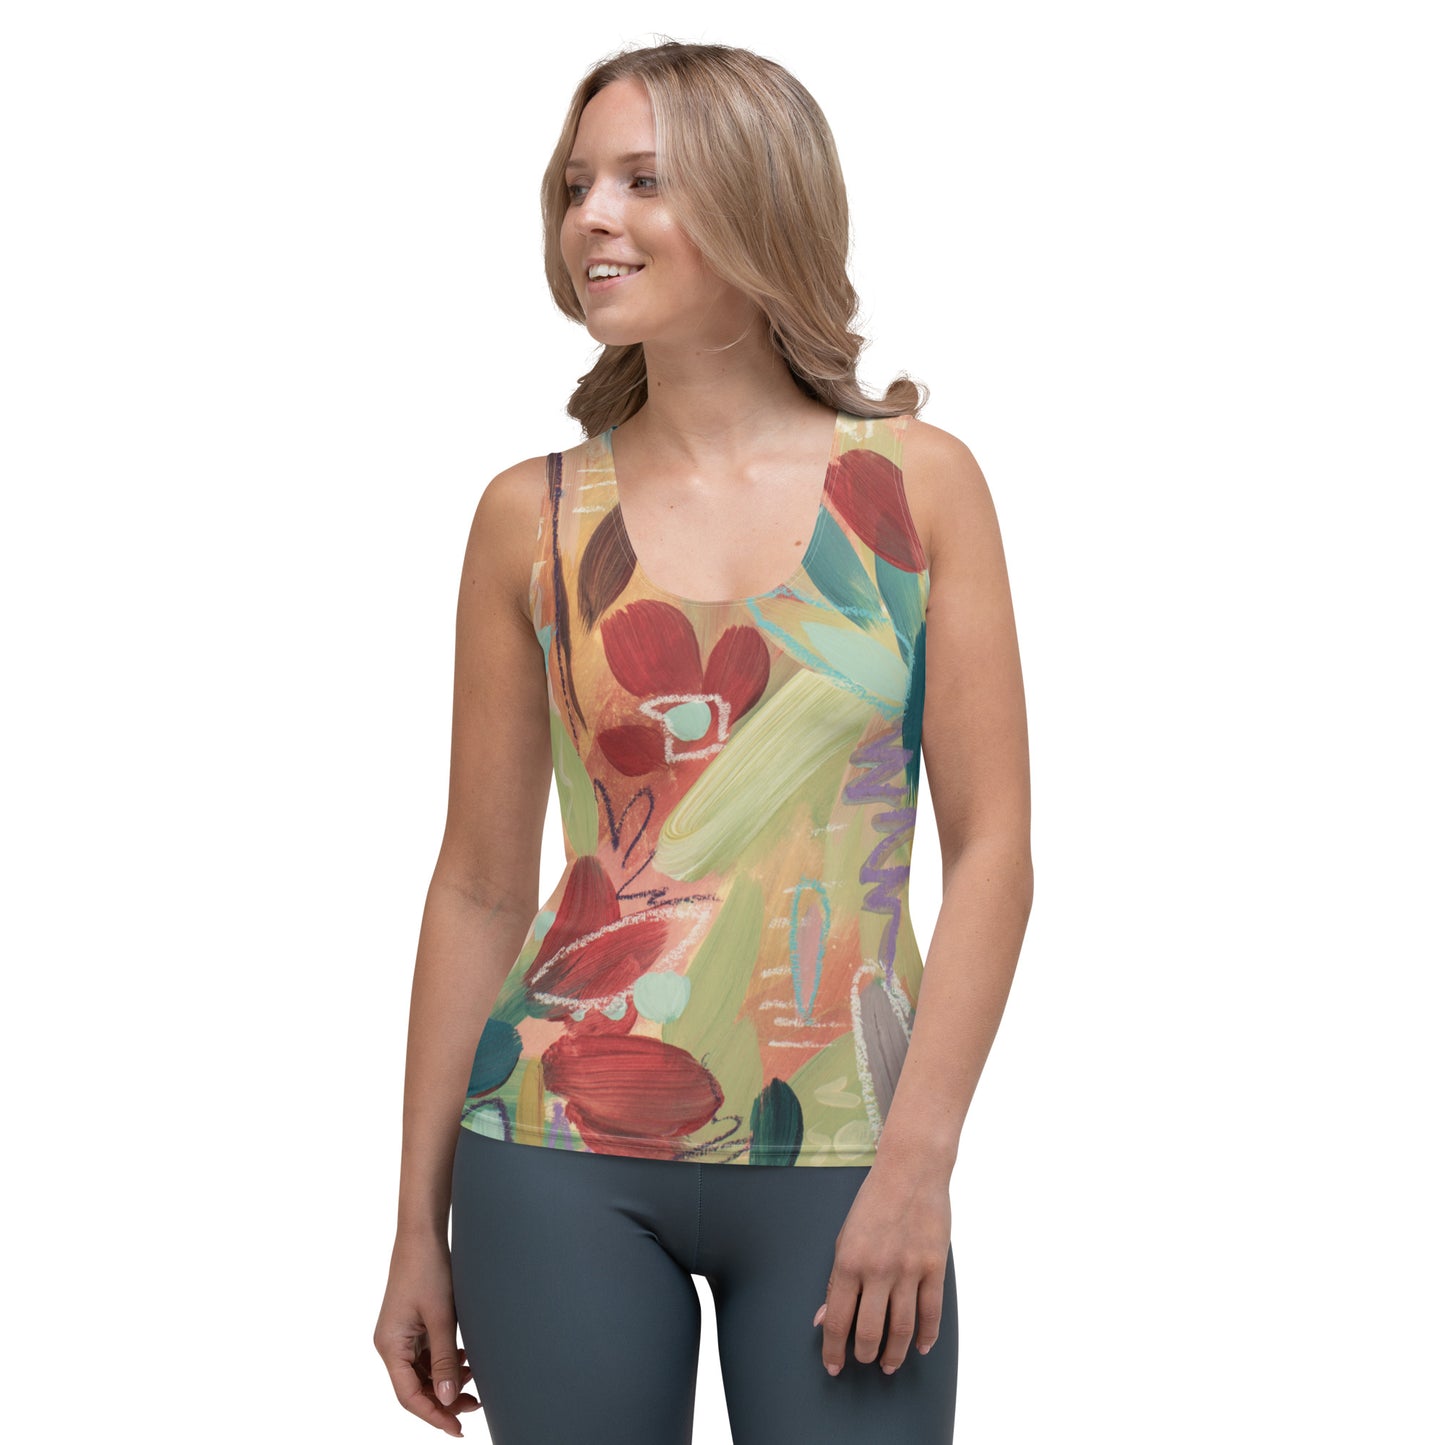 Asking for Flowers Tank Top